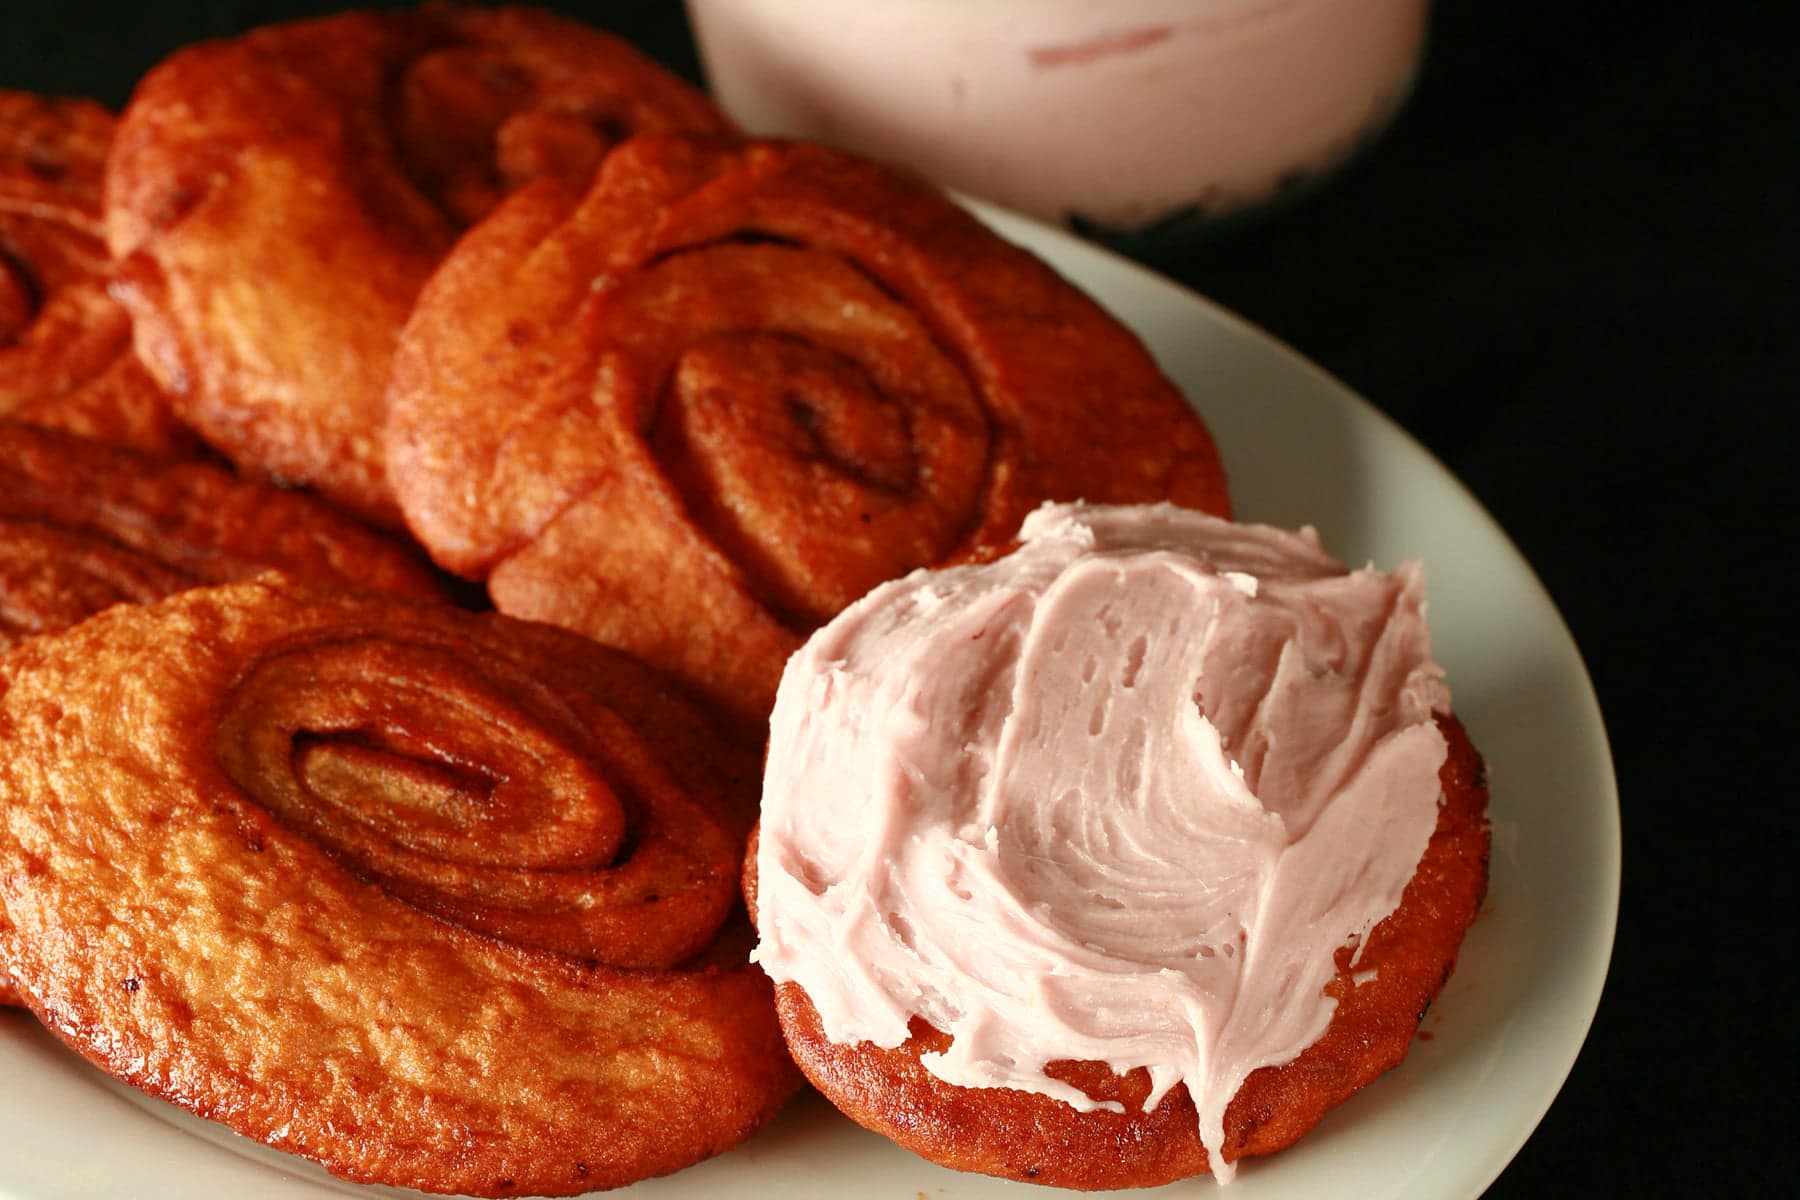 Deep fried cinnamon rolls are arranged on a white platter, one is spread with a pink frosting - A Persian roll!